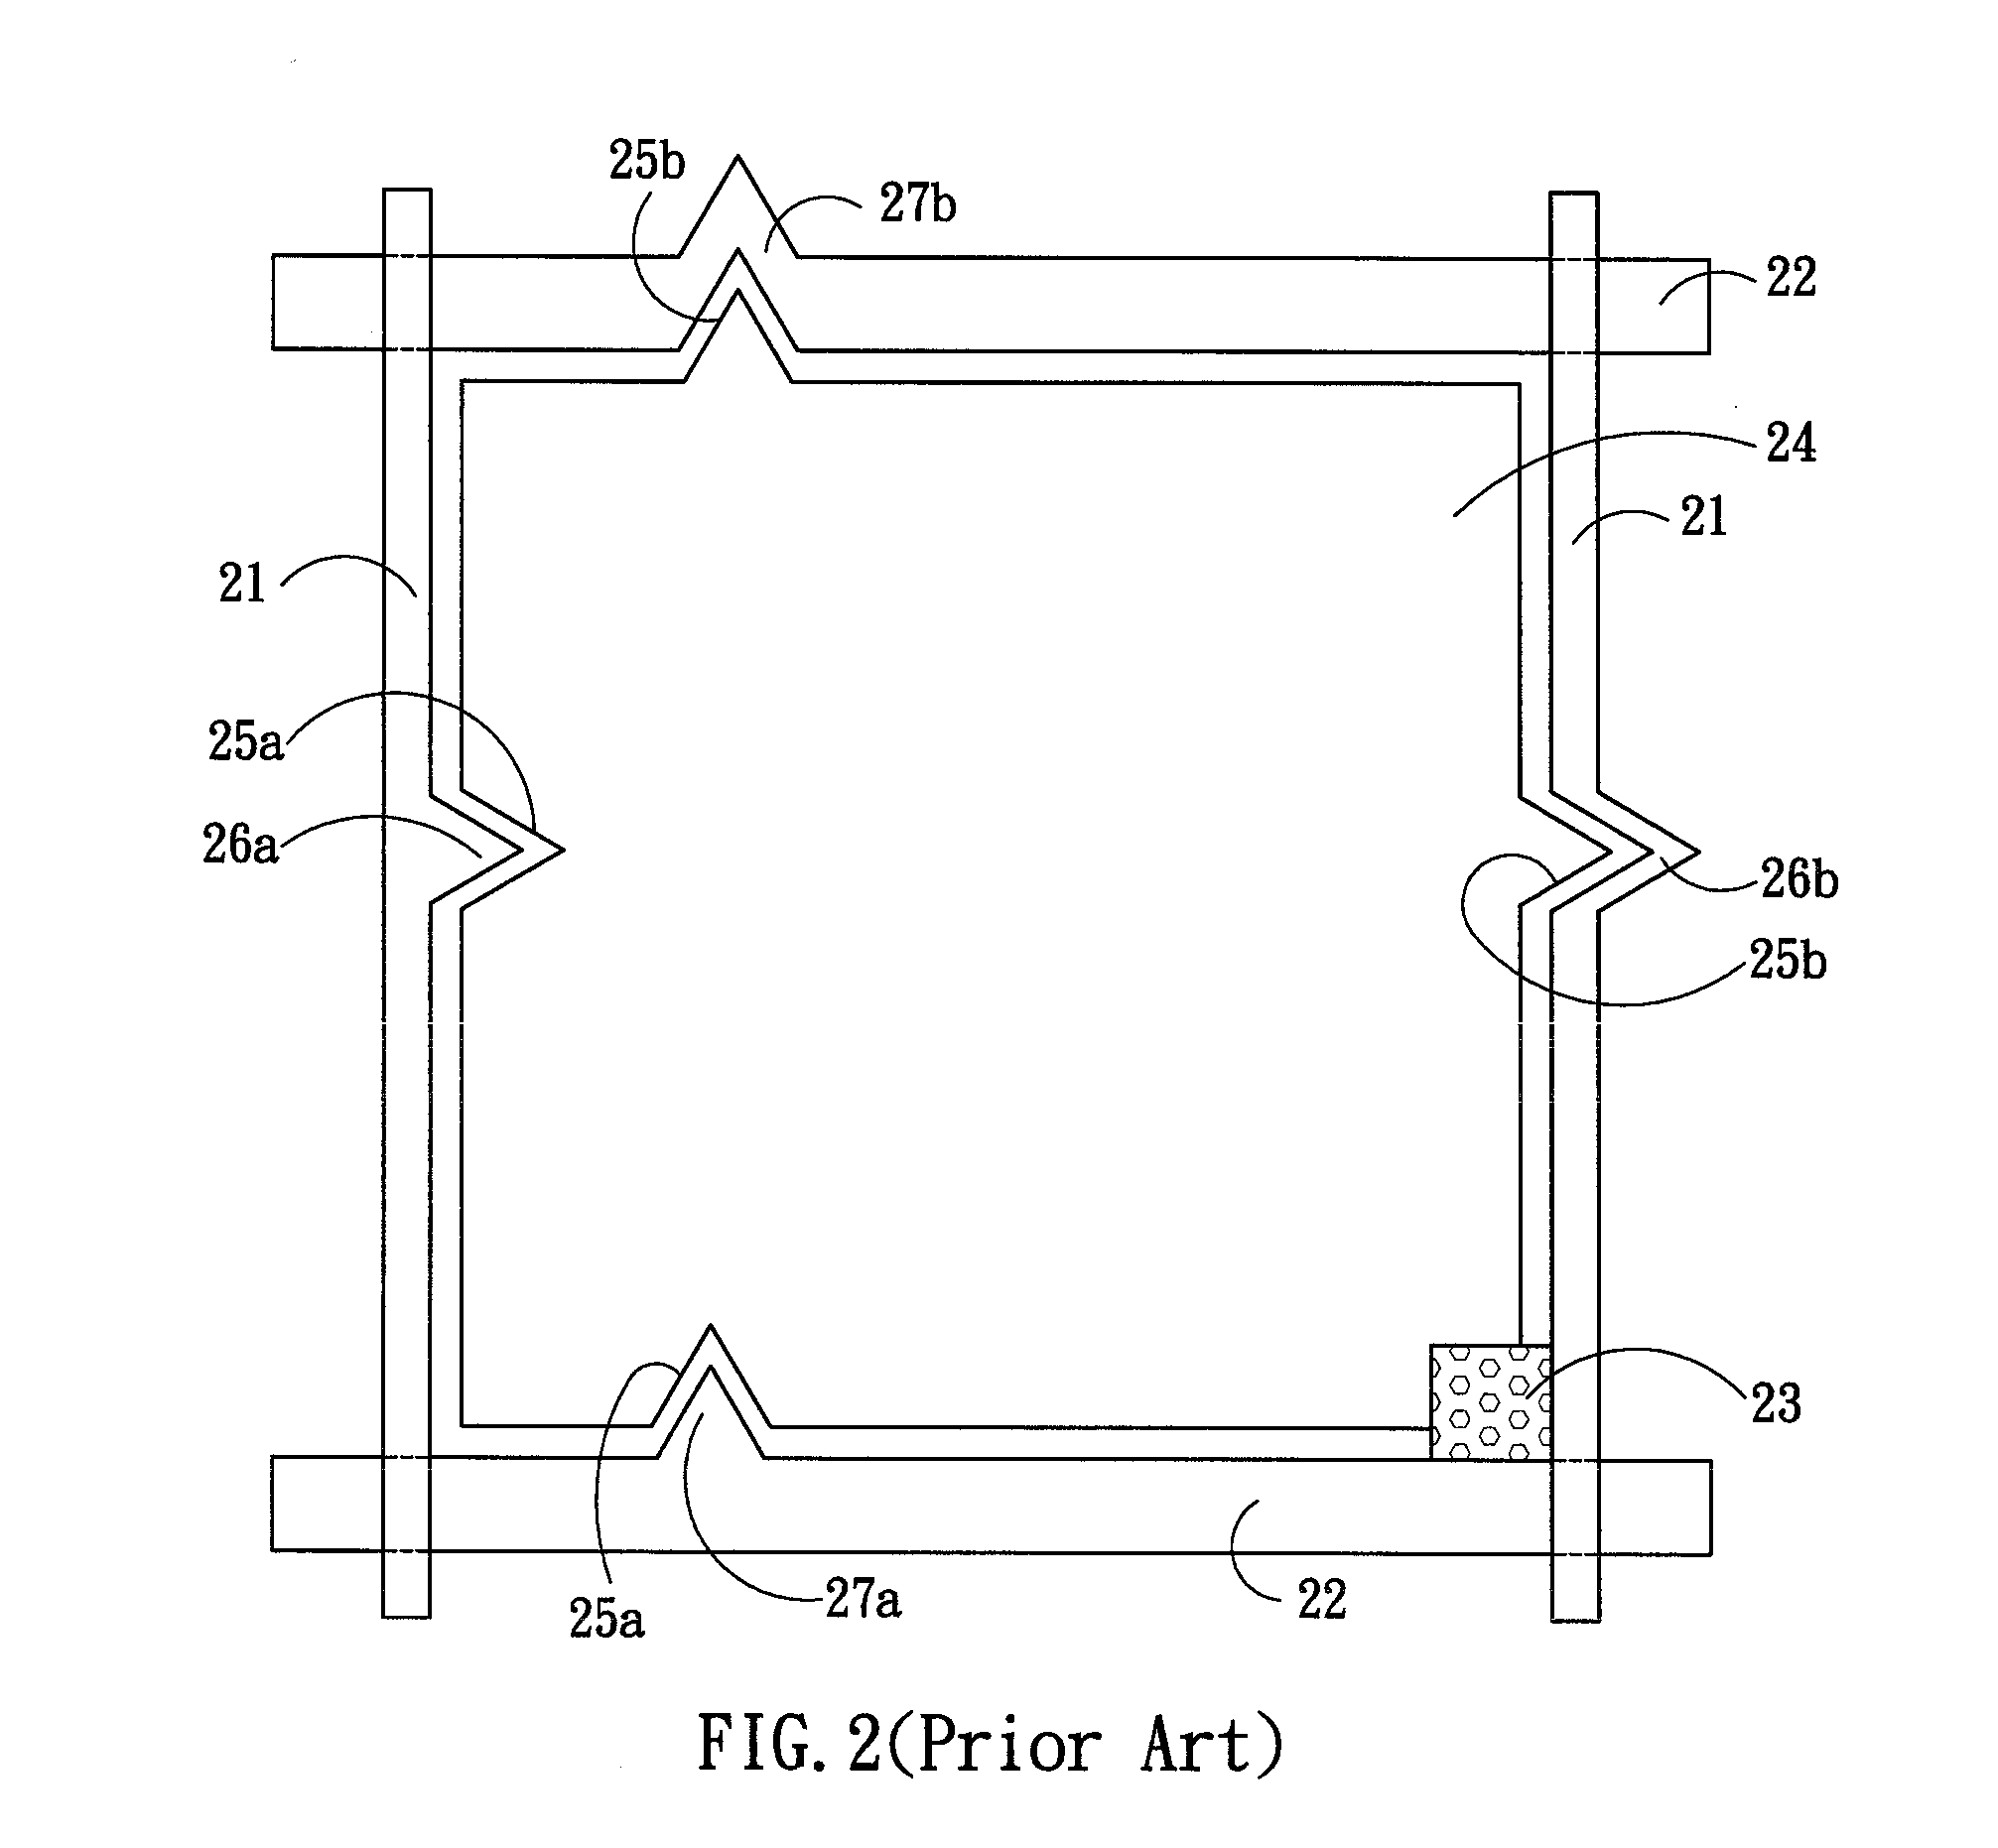 Pixel element of liquid crystal display and method for producing the same